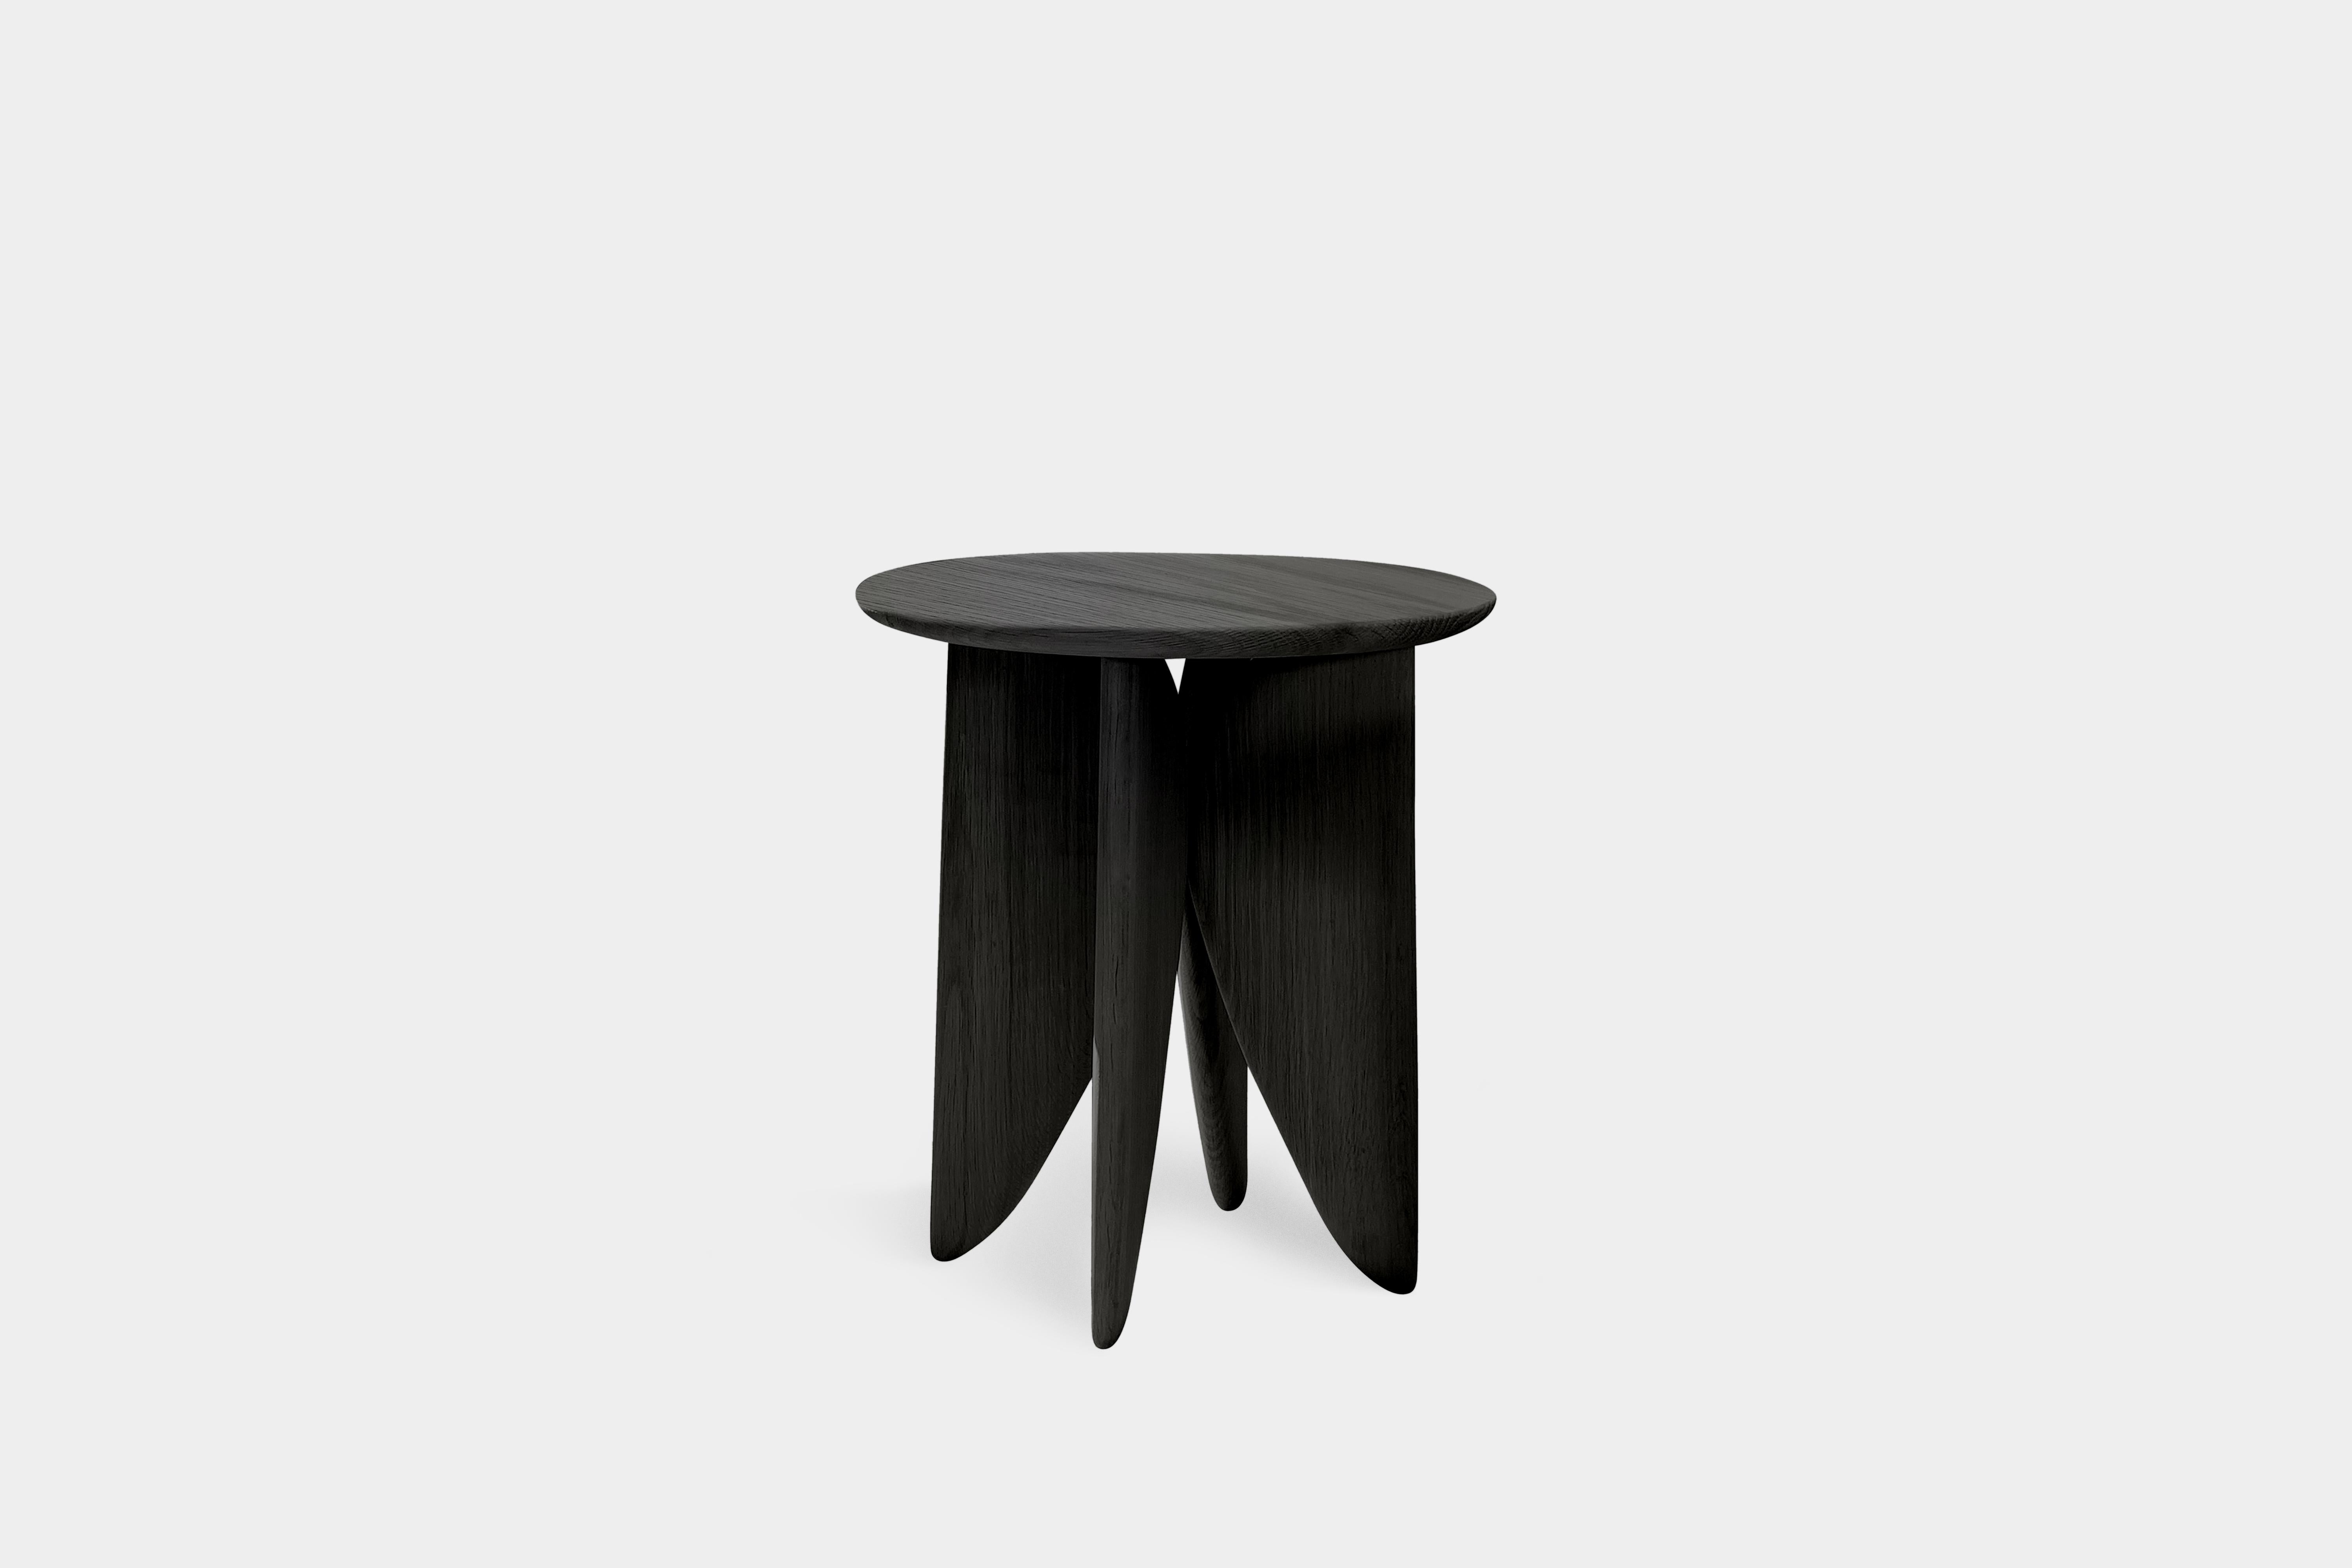 Noviembre V Stool, Side Table inspired in Burned Oak Wood by Joel Escalona

The Noviembre collection is inspired by the creative values of Constantin Brancusi, a Romanian sculptor considered one of the most influential artists of the twentieth